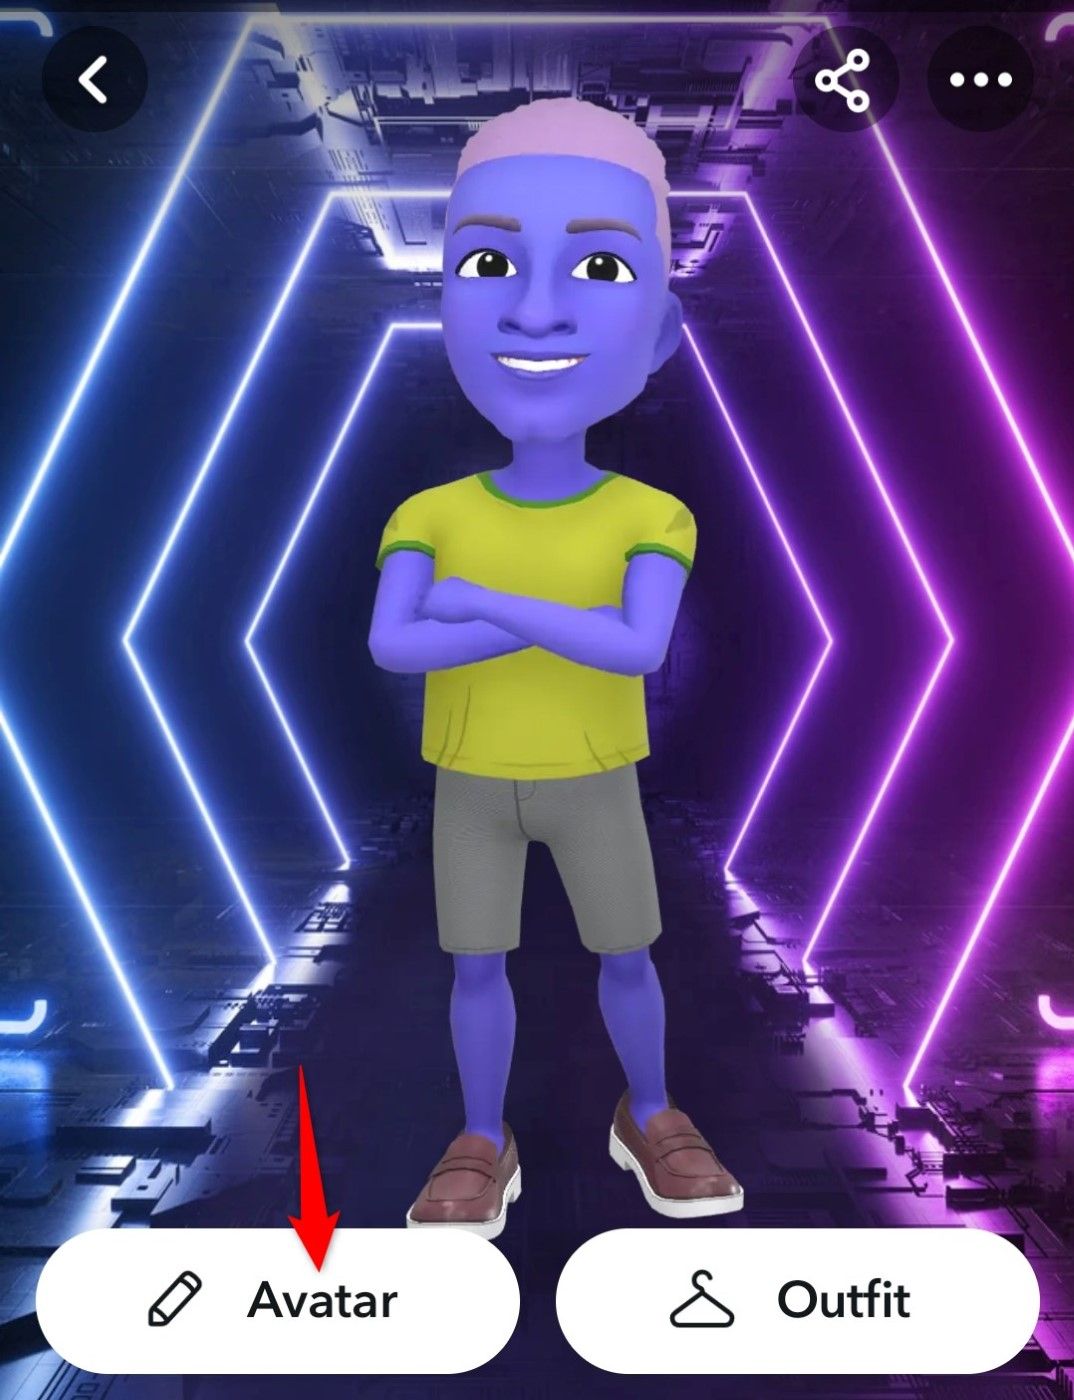 'Avatar' highlighted on the My AI page in Snapchat.